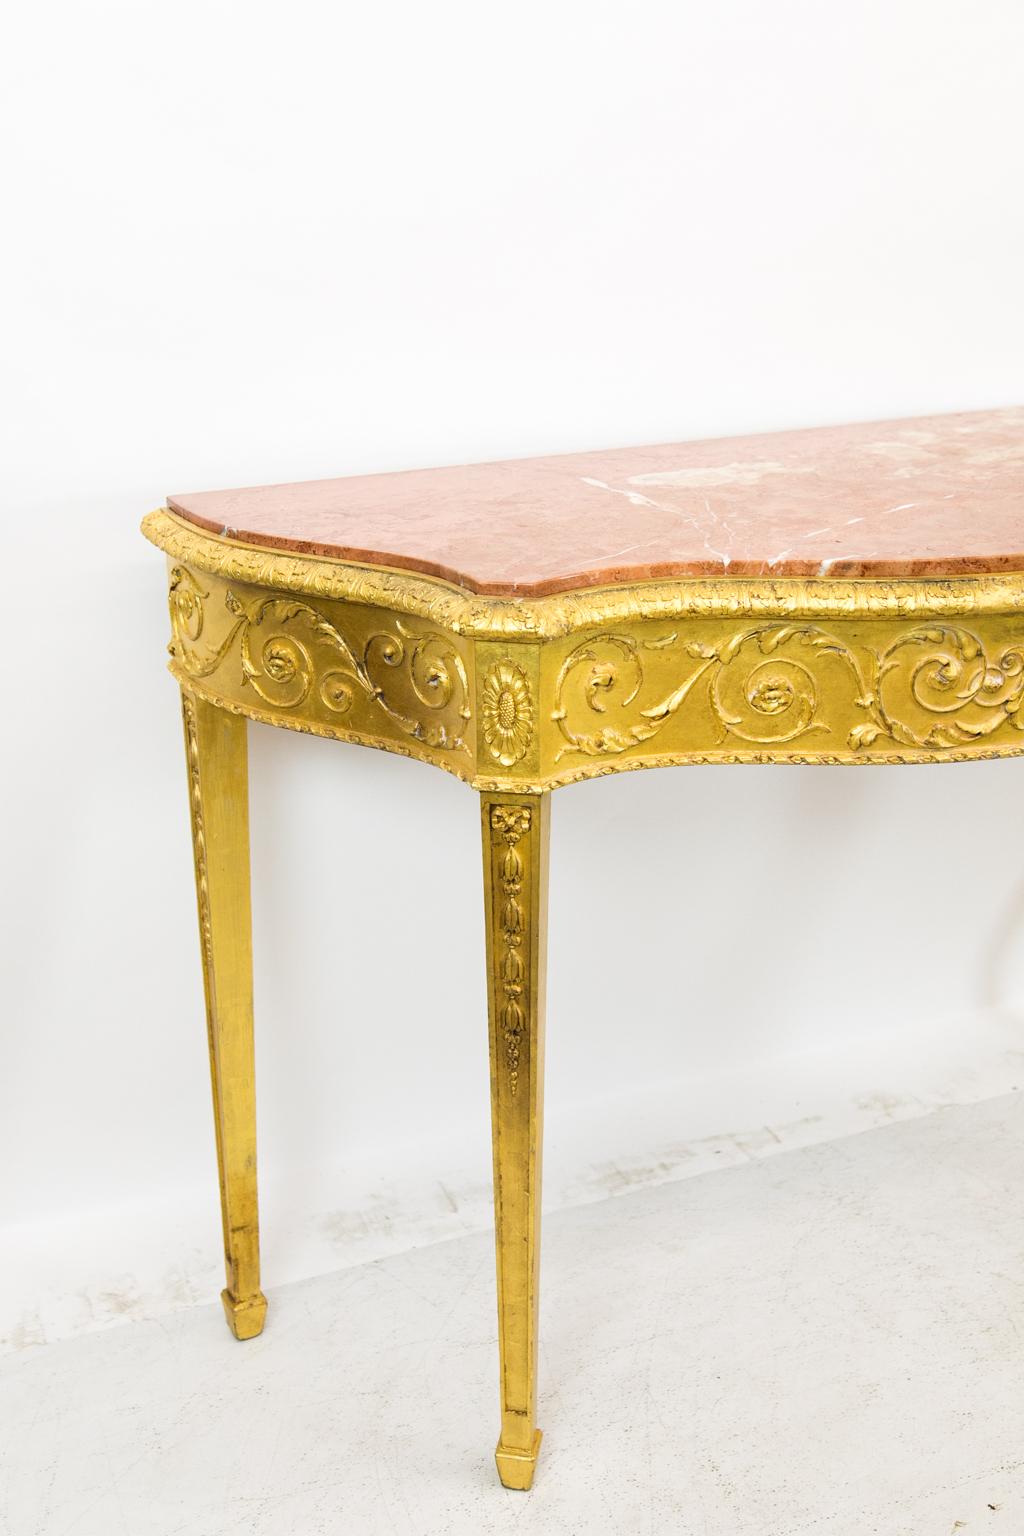 Early 20th Century Serpentine English Marble-Top Gilt Console Table For Sale